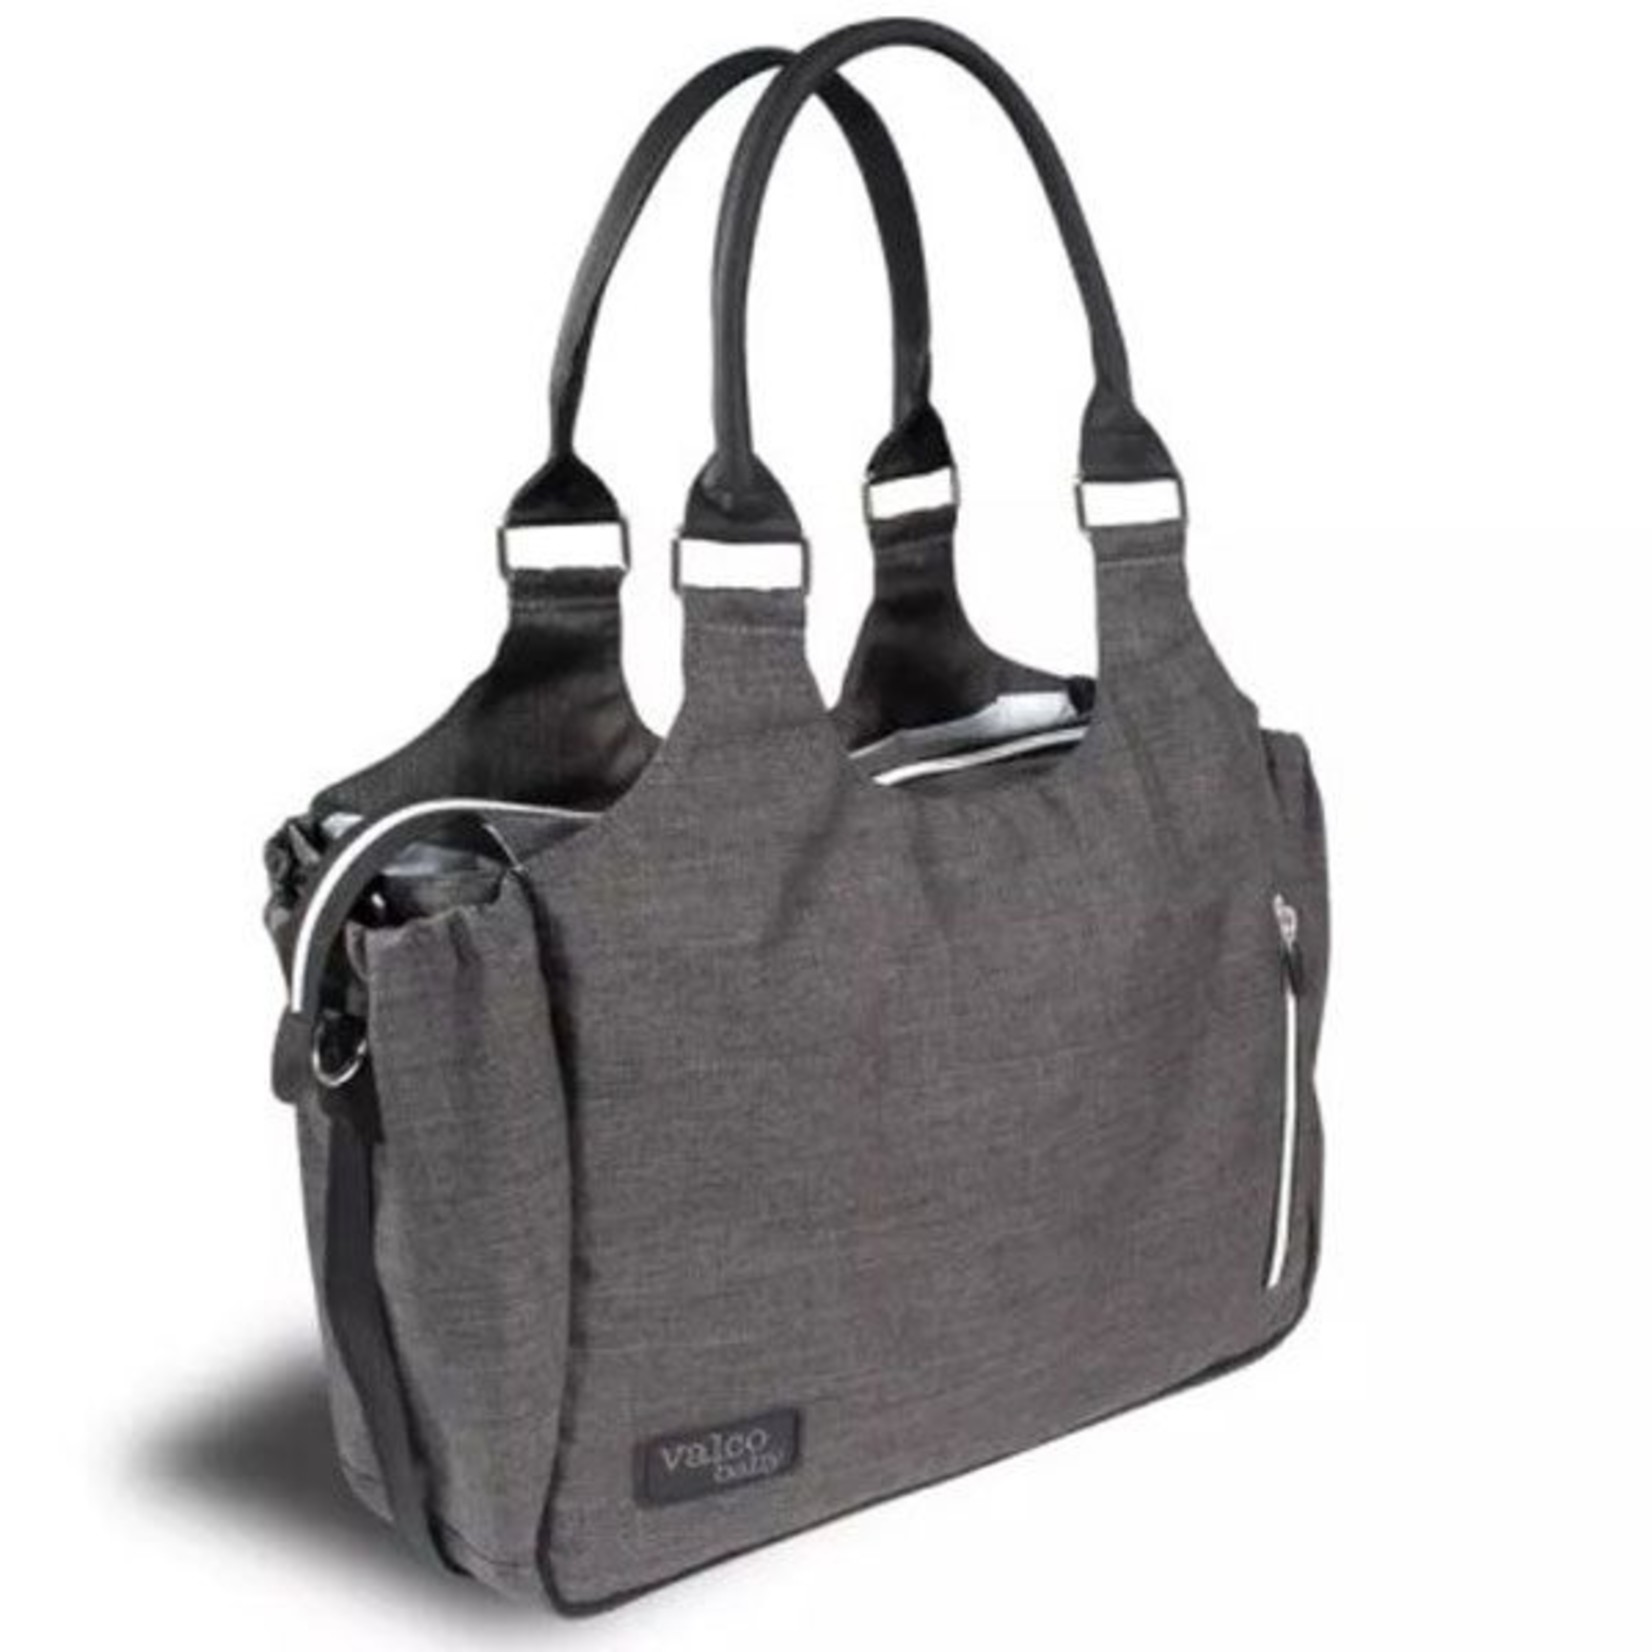 Valco Baby Mothers Bag-Charcoal